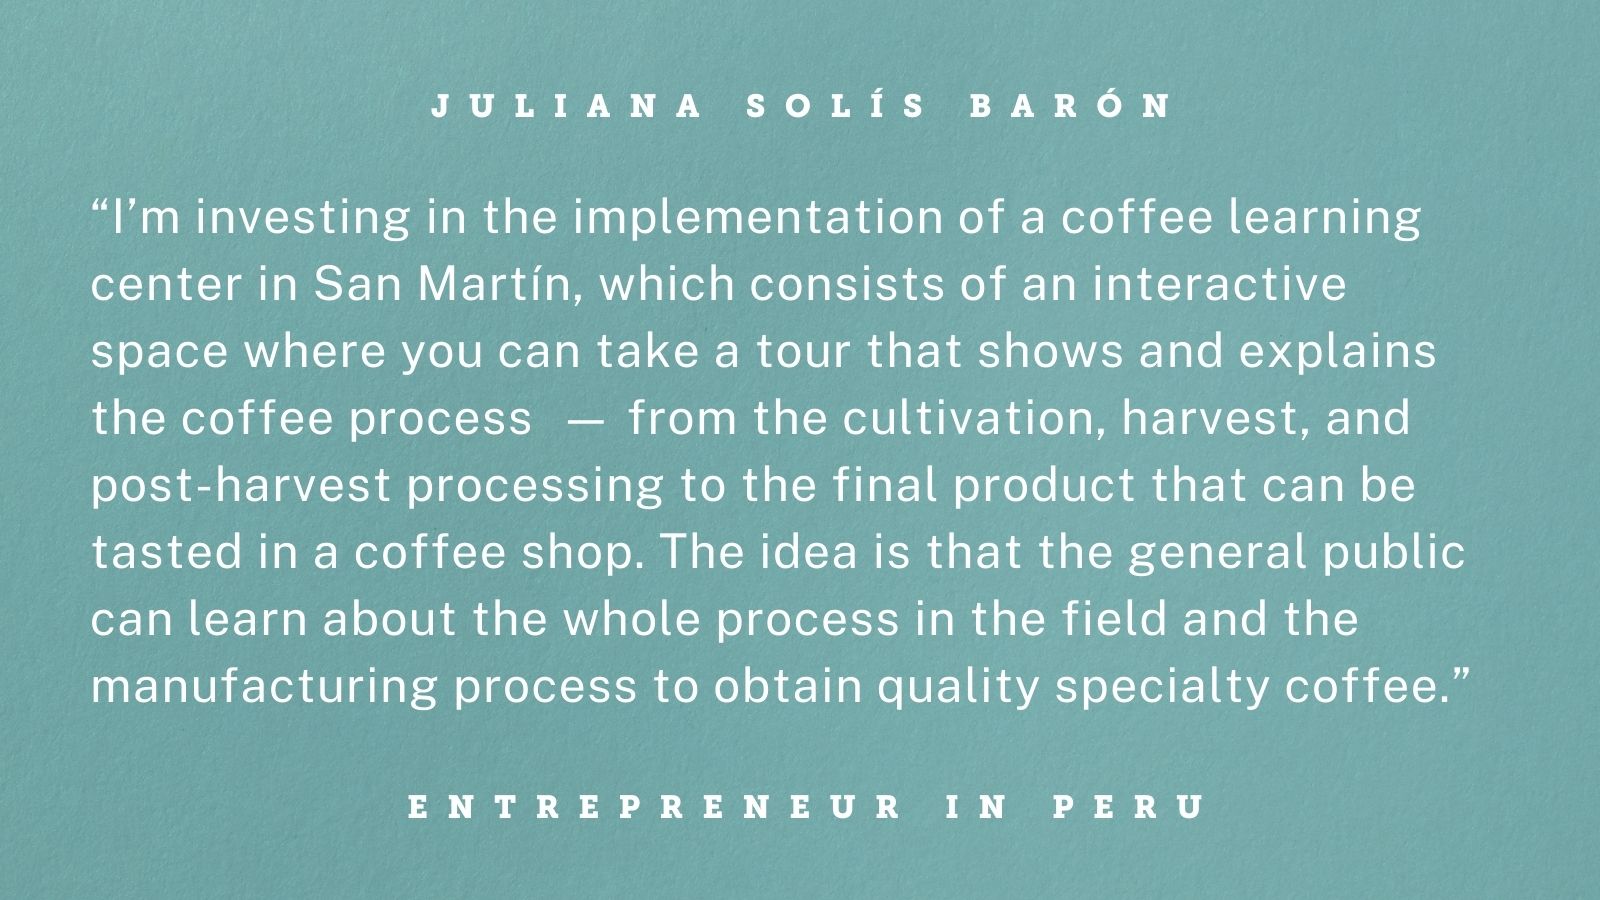 Quote from an entrepreneur in Peru. Graphic reads: “I’m investing in the implementation of a coffee learning center in San Martín, which consists of an interactive space where you can take a tour that shows and explains the coffee process -- from the cultivation, harvest, and post-harvest processing to the final product that can be tasted in a coffee shop. The idea is that the general public can learn about the whole process in the field and the manufacturing process to obtain quality specialty coffee.” 